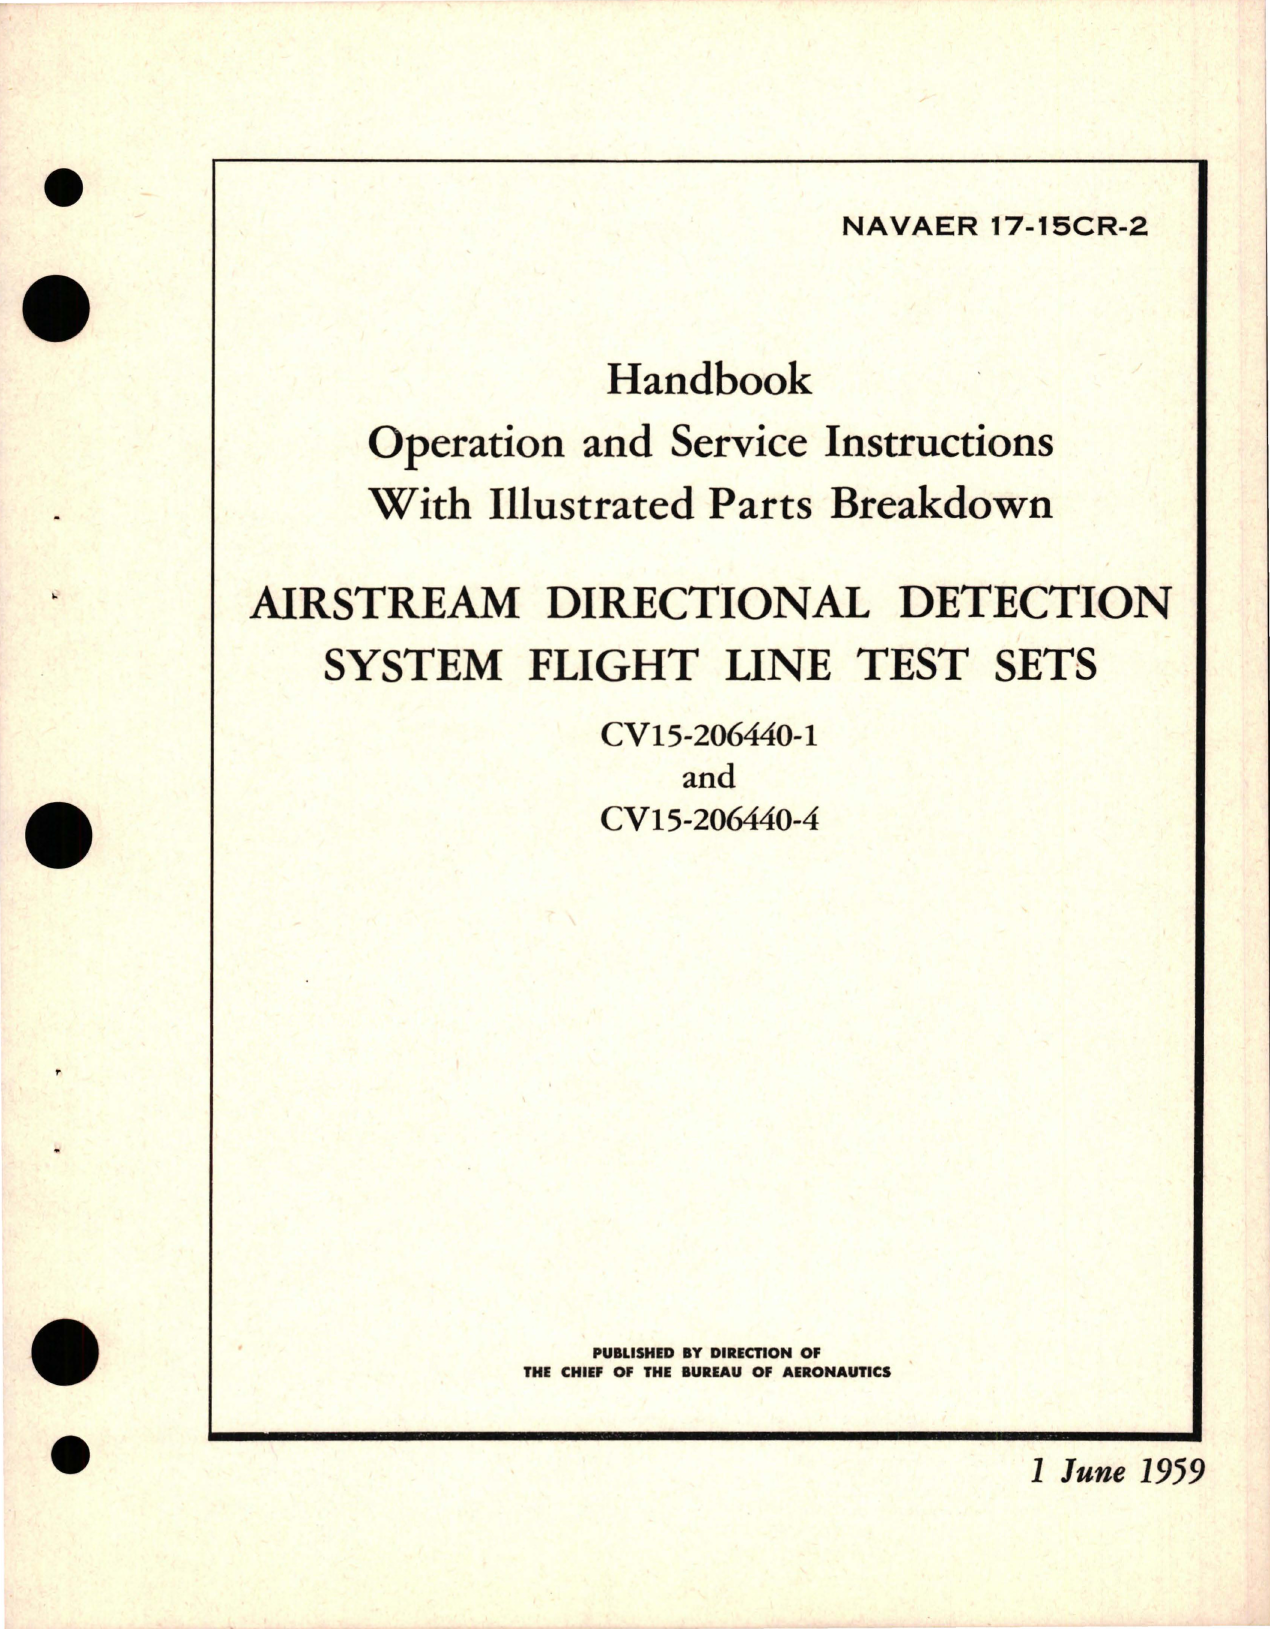 Sample page 1 from AirCorps Library document: Operation and Service Instructions with Illustrated Parts for Airstream Directional Detection System Flight Line Test Sets - CV15-206440-1, CV15-206440-4